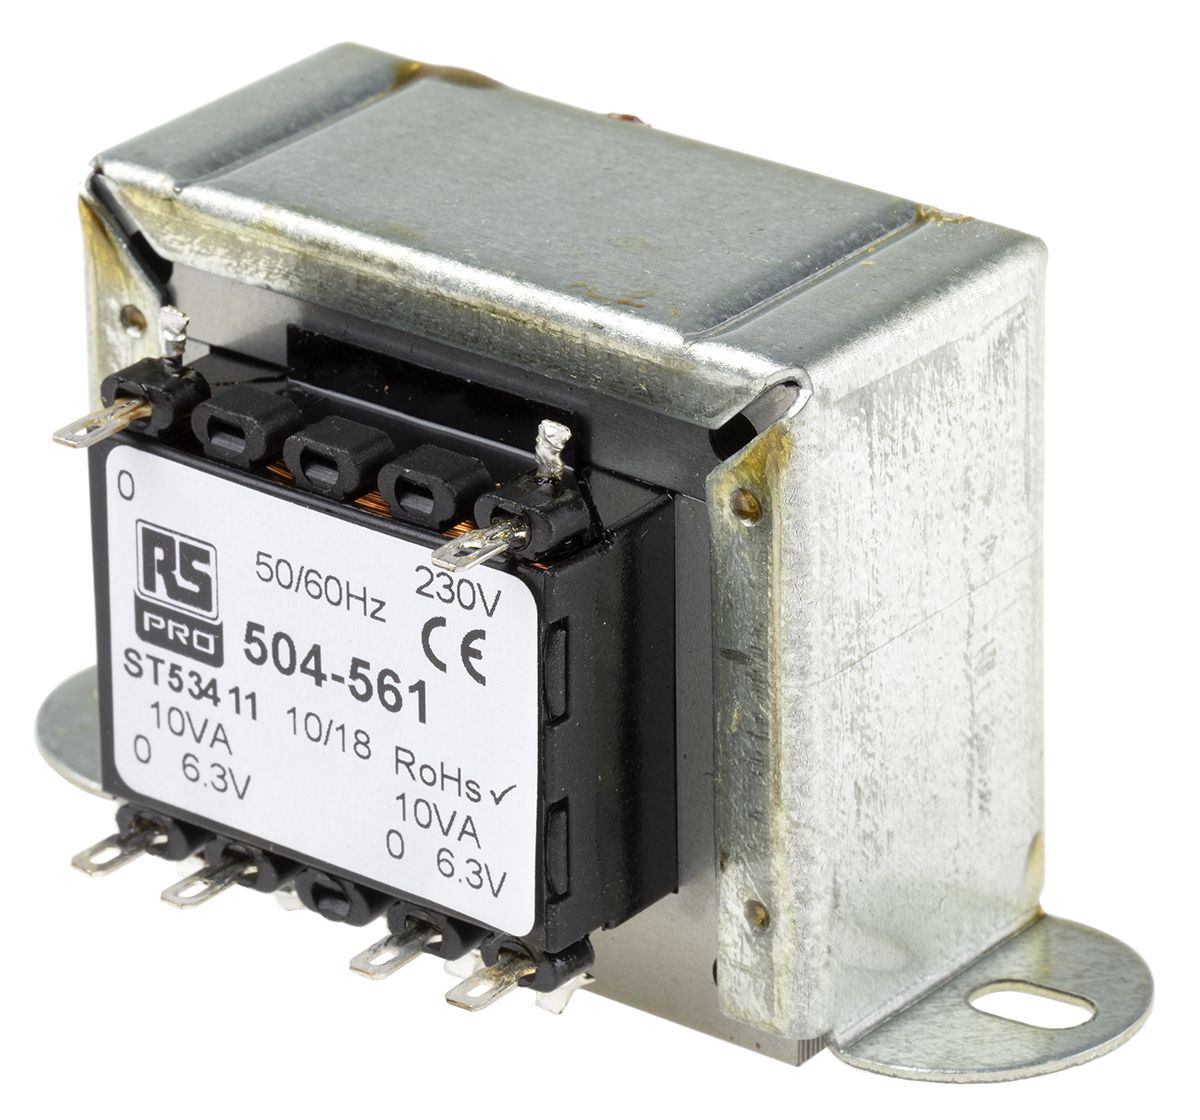 RS PRO 20VA 2 Output Chassis Mounting Transformer, 6.3V ac